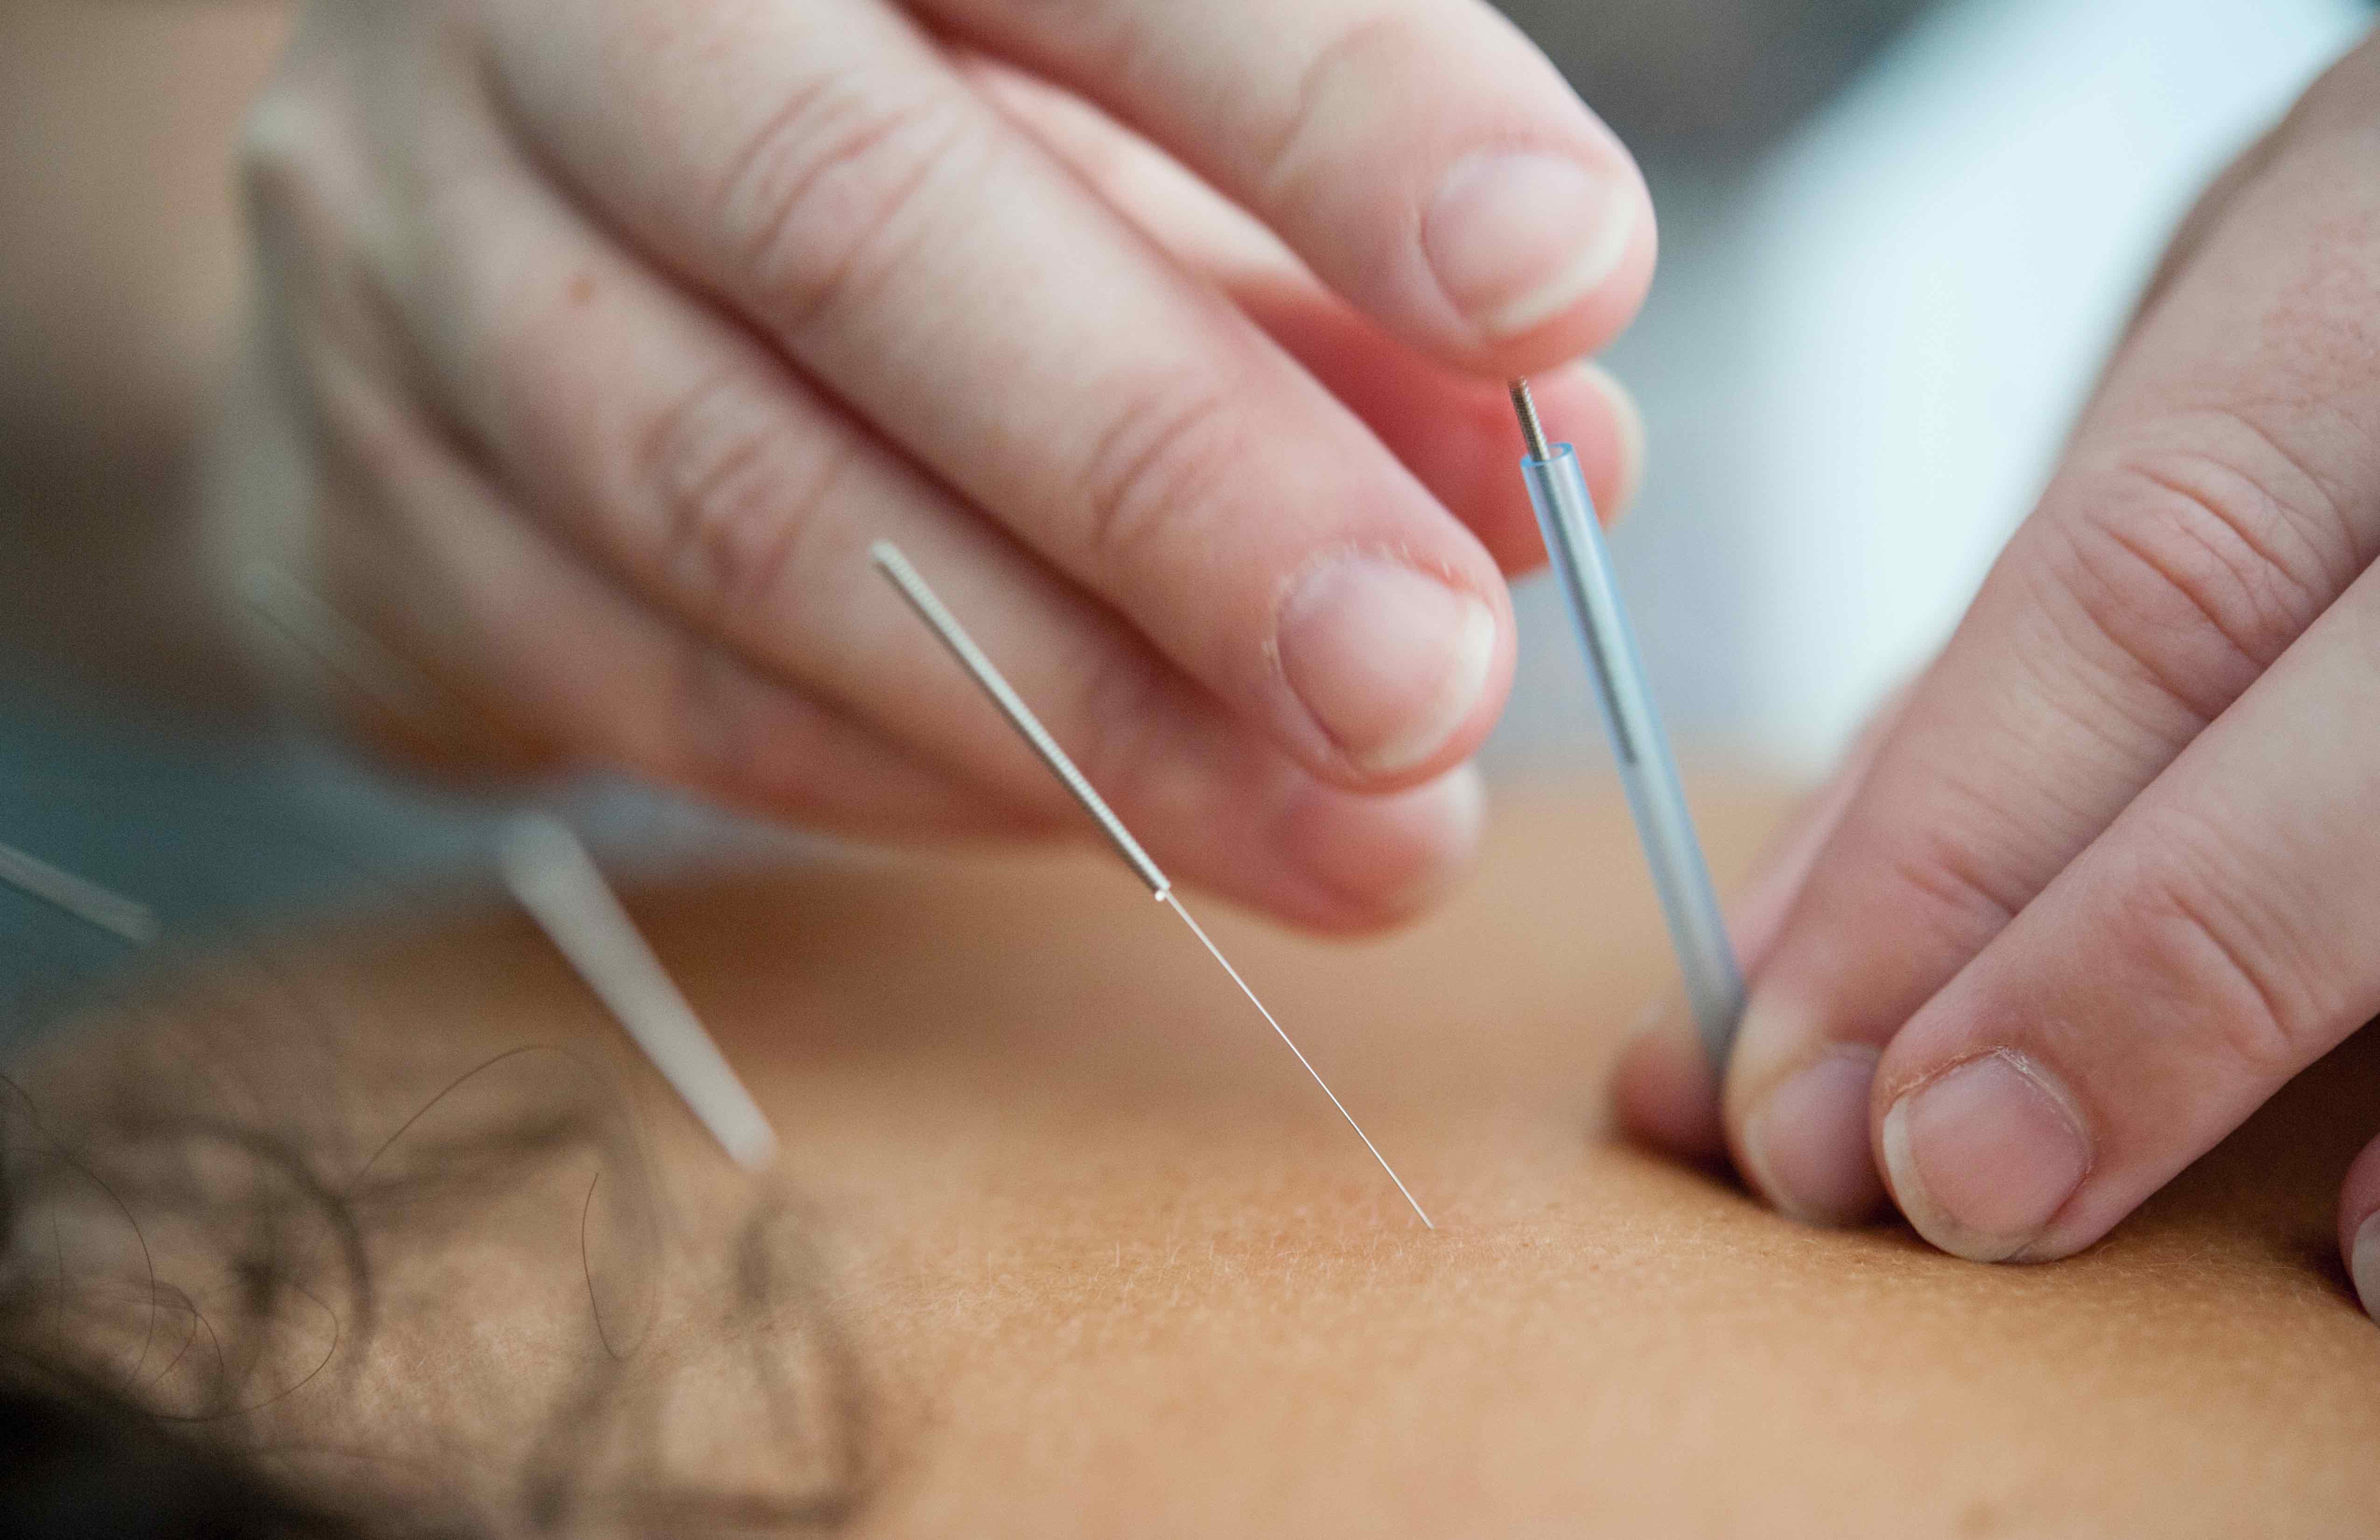 acupuncture is a solution to reduce pain